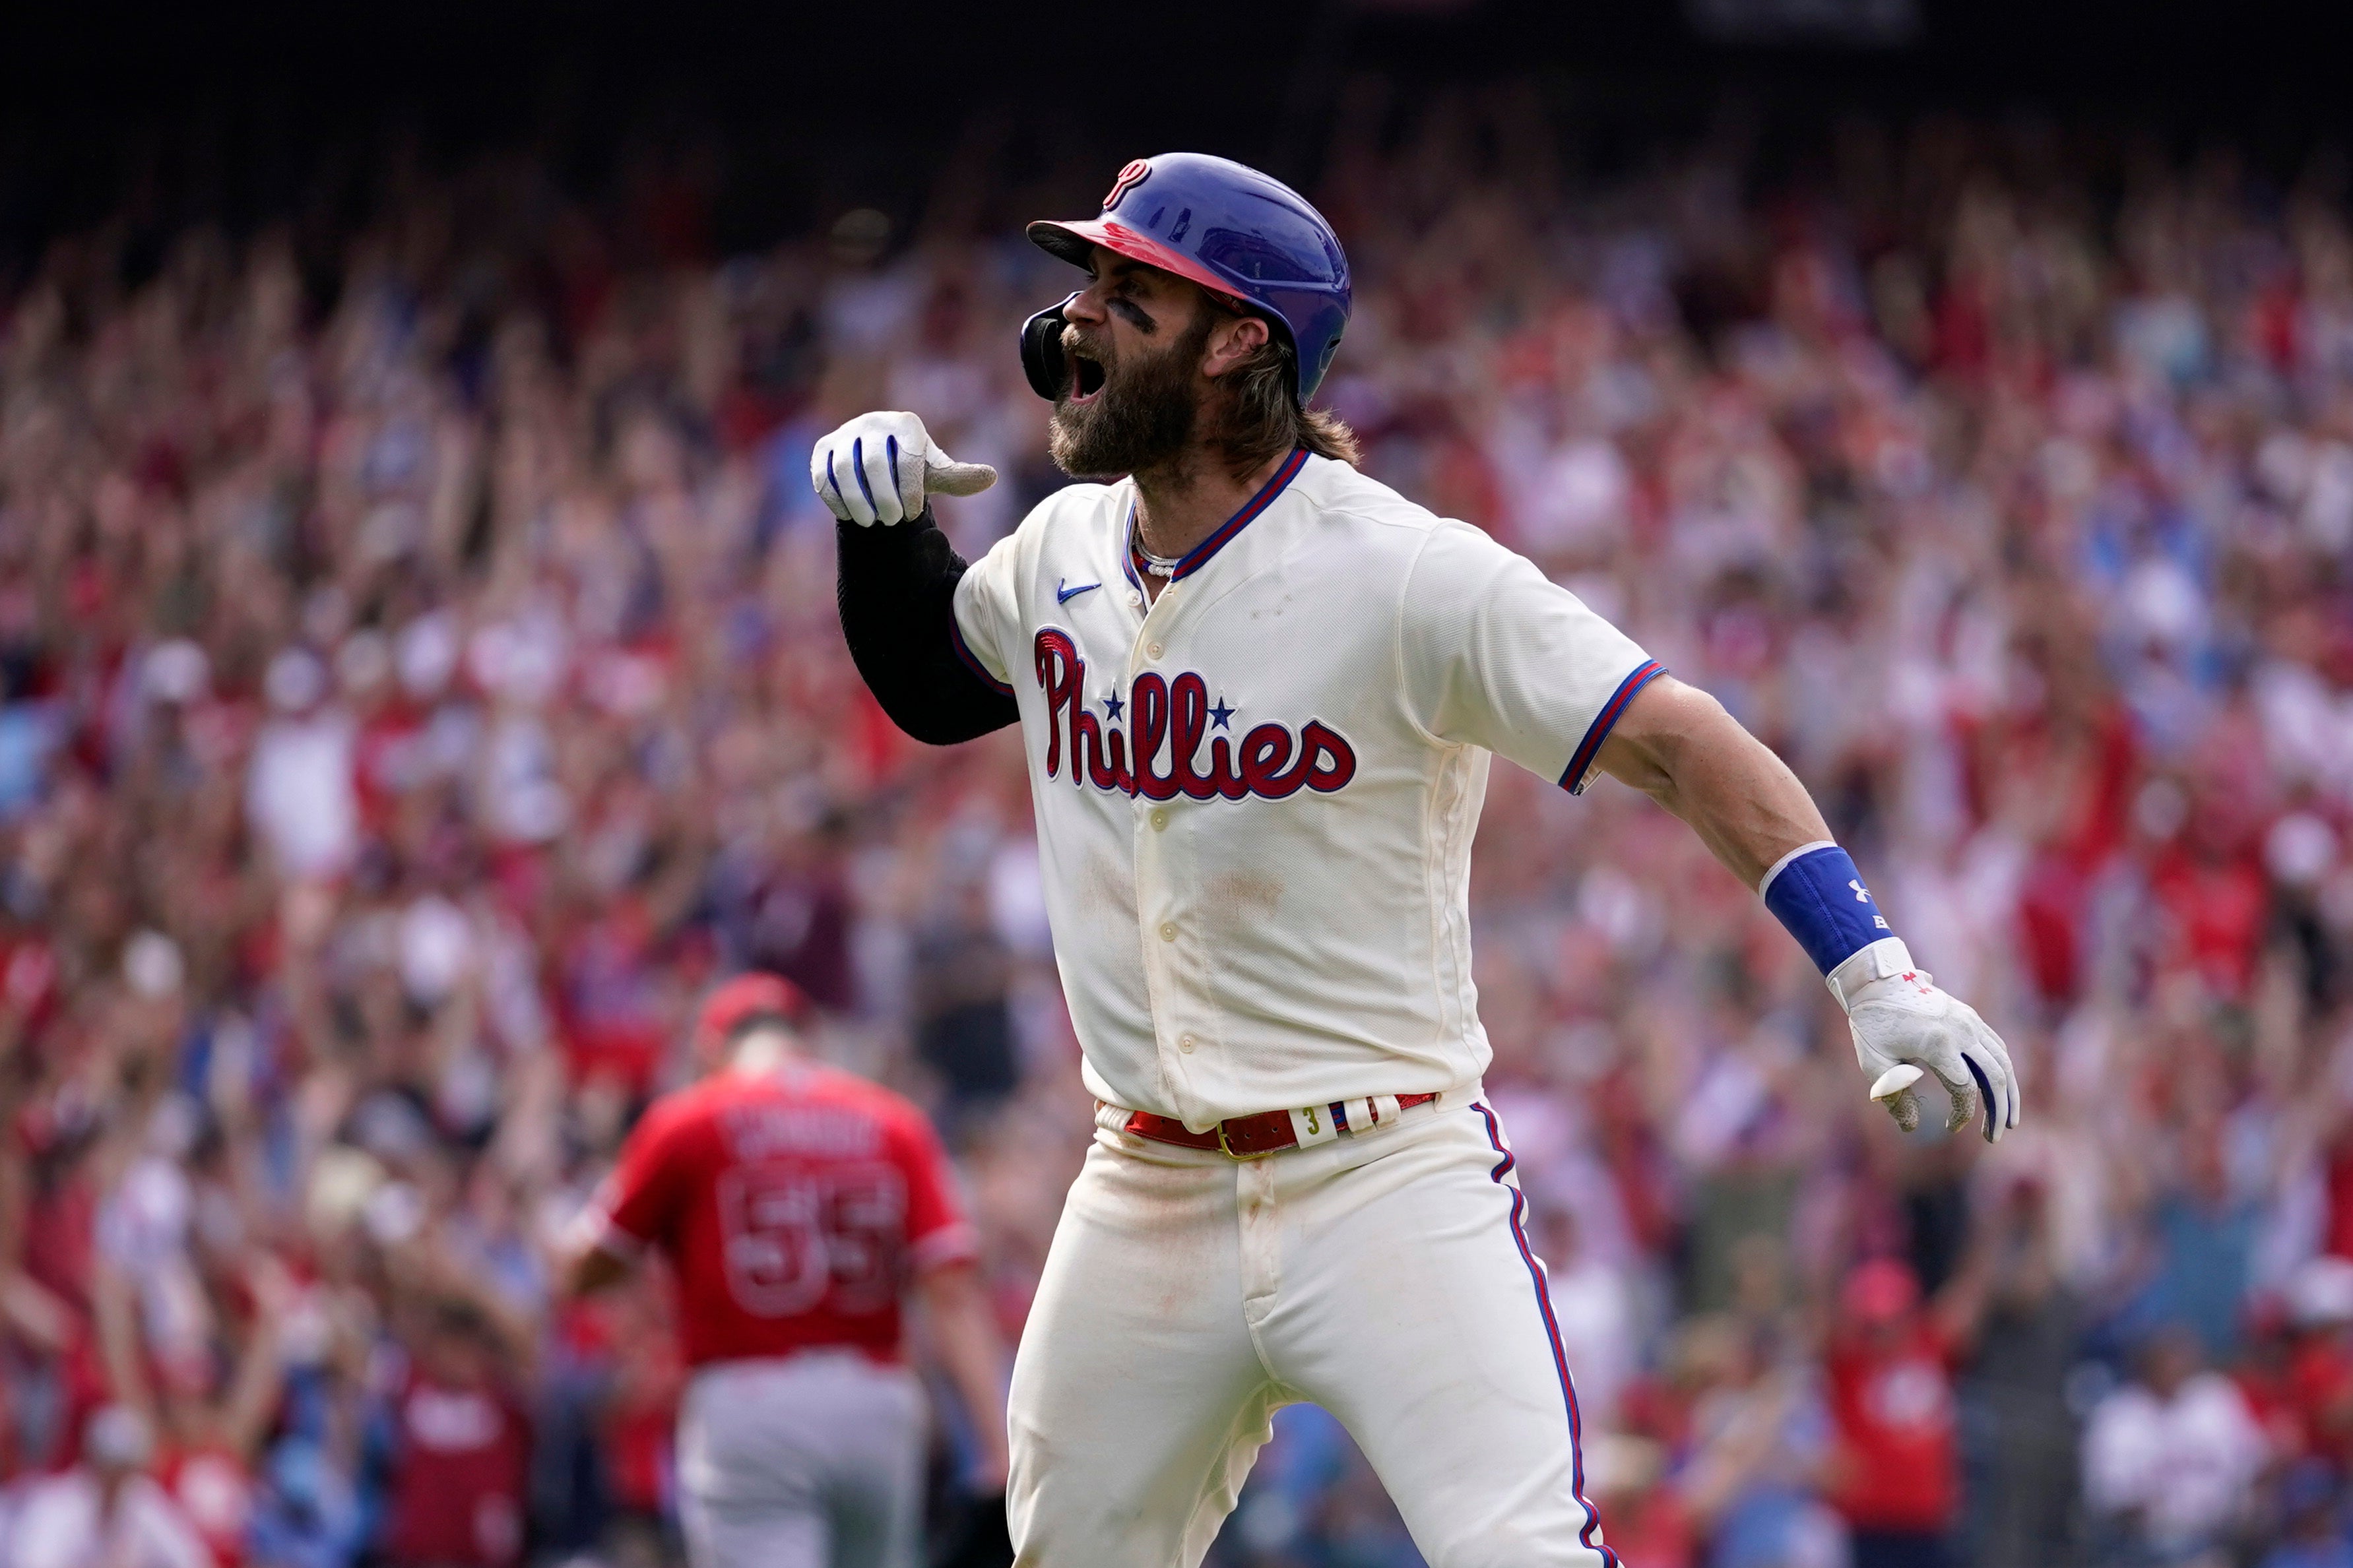 Twitter reacts to Harper signing with Phillies